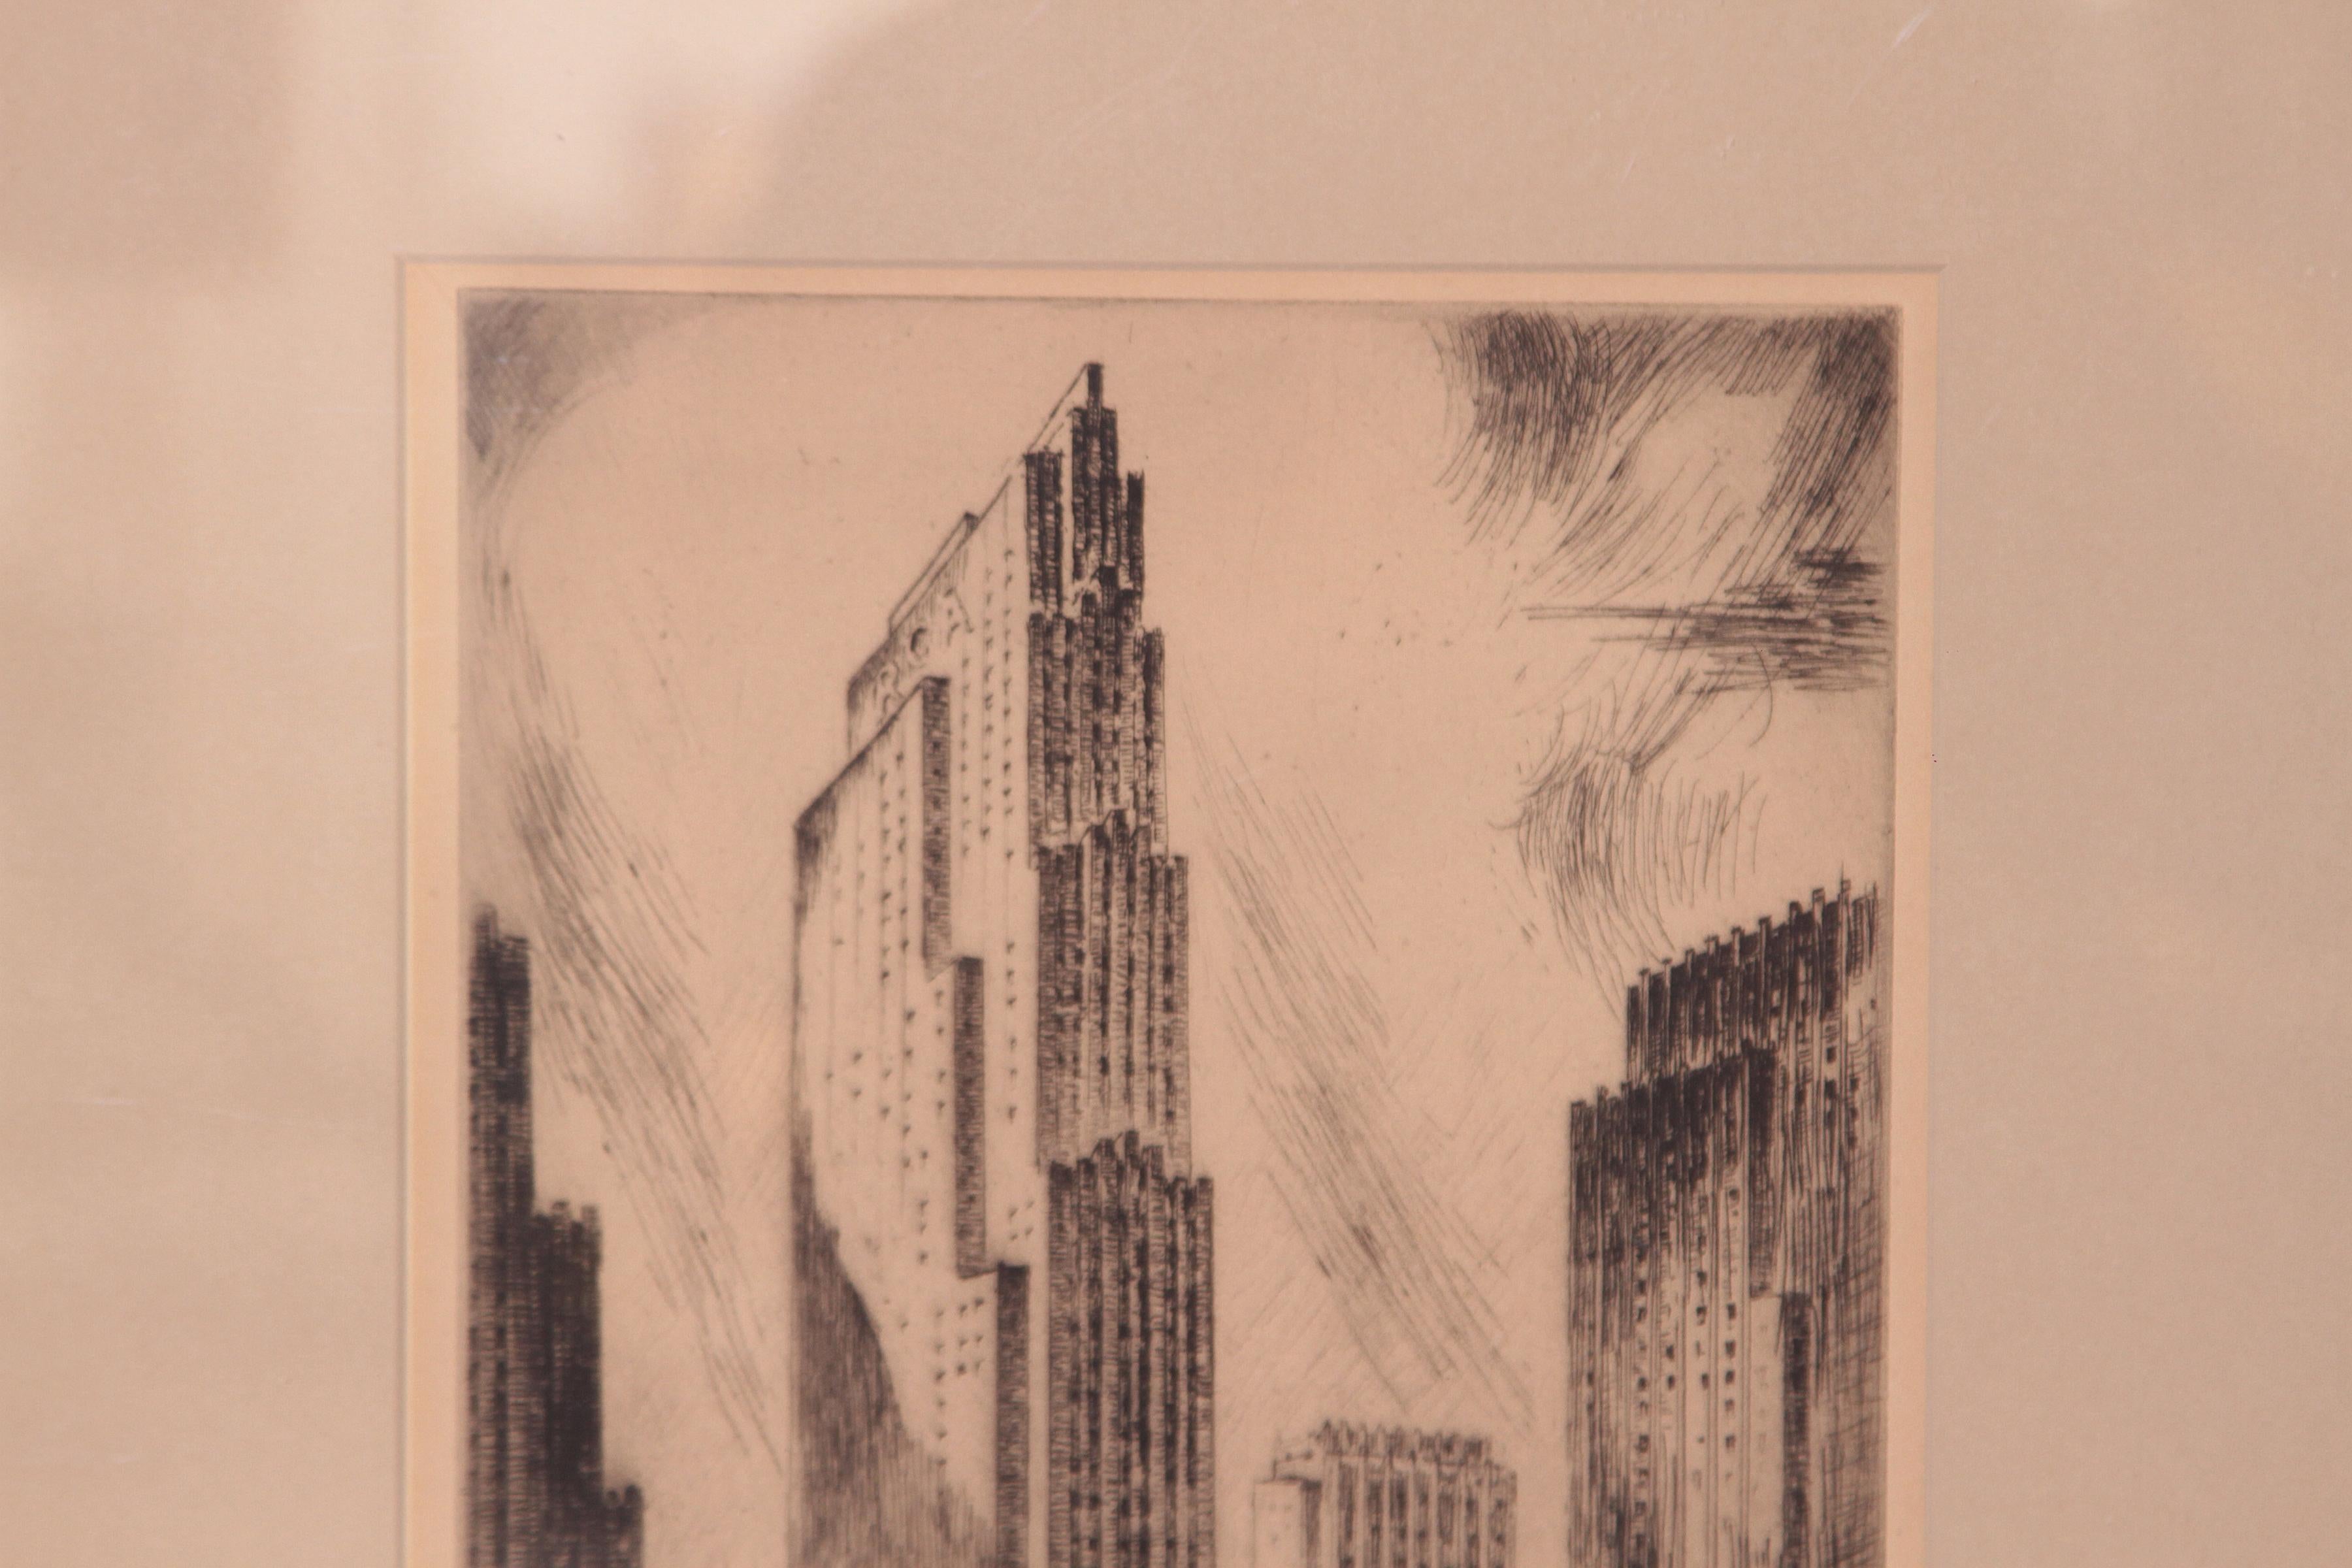 Art Deco Machine Age Rockefeller center skyscraper New York City Nat Lowell etching

From an original Associated American Artists in-house portfolio, circa 1934-1940.
Associated American Artists (AAA) was an art gallery in New York City that was